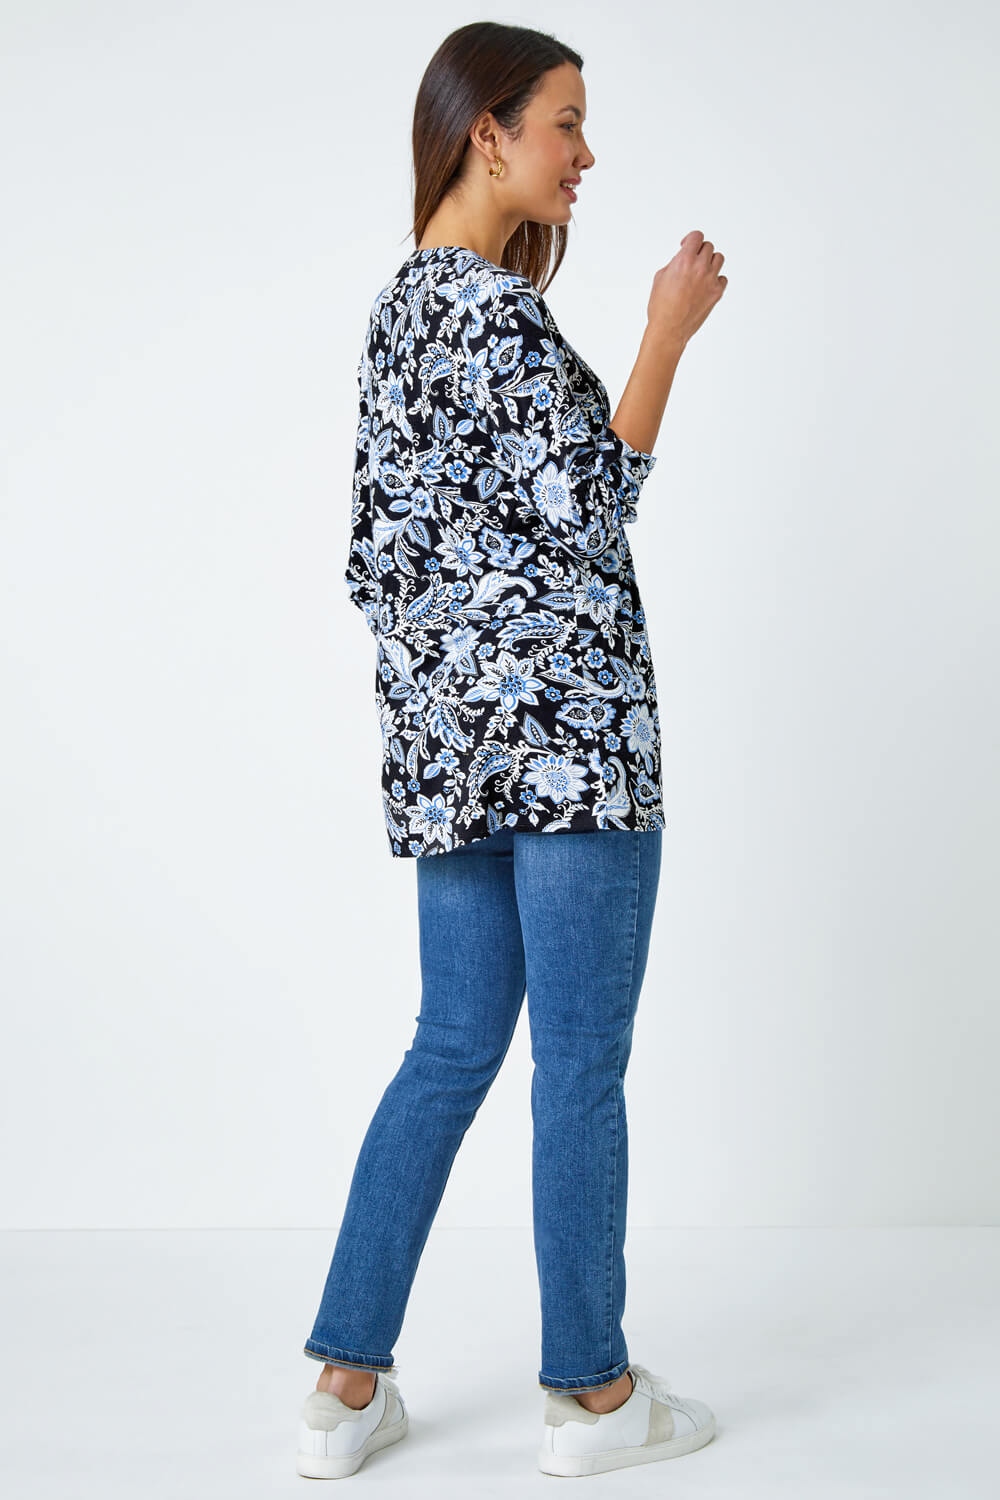 Black Floral Print Pintuck Stretch Top, Image 3 of 5